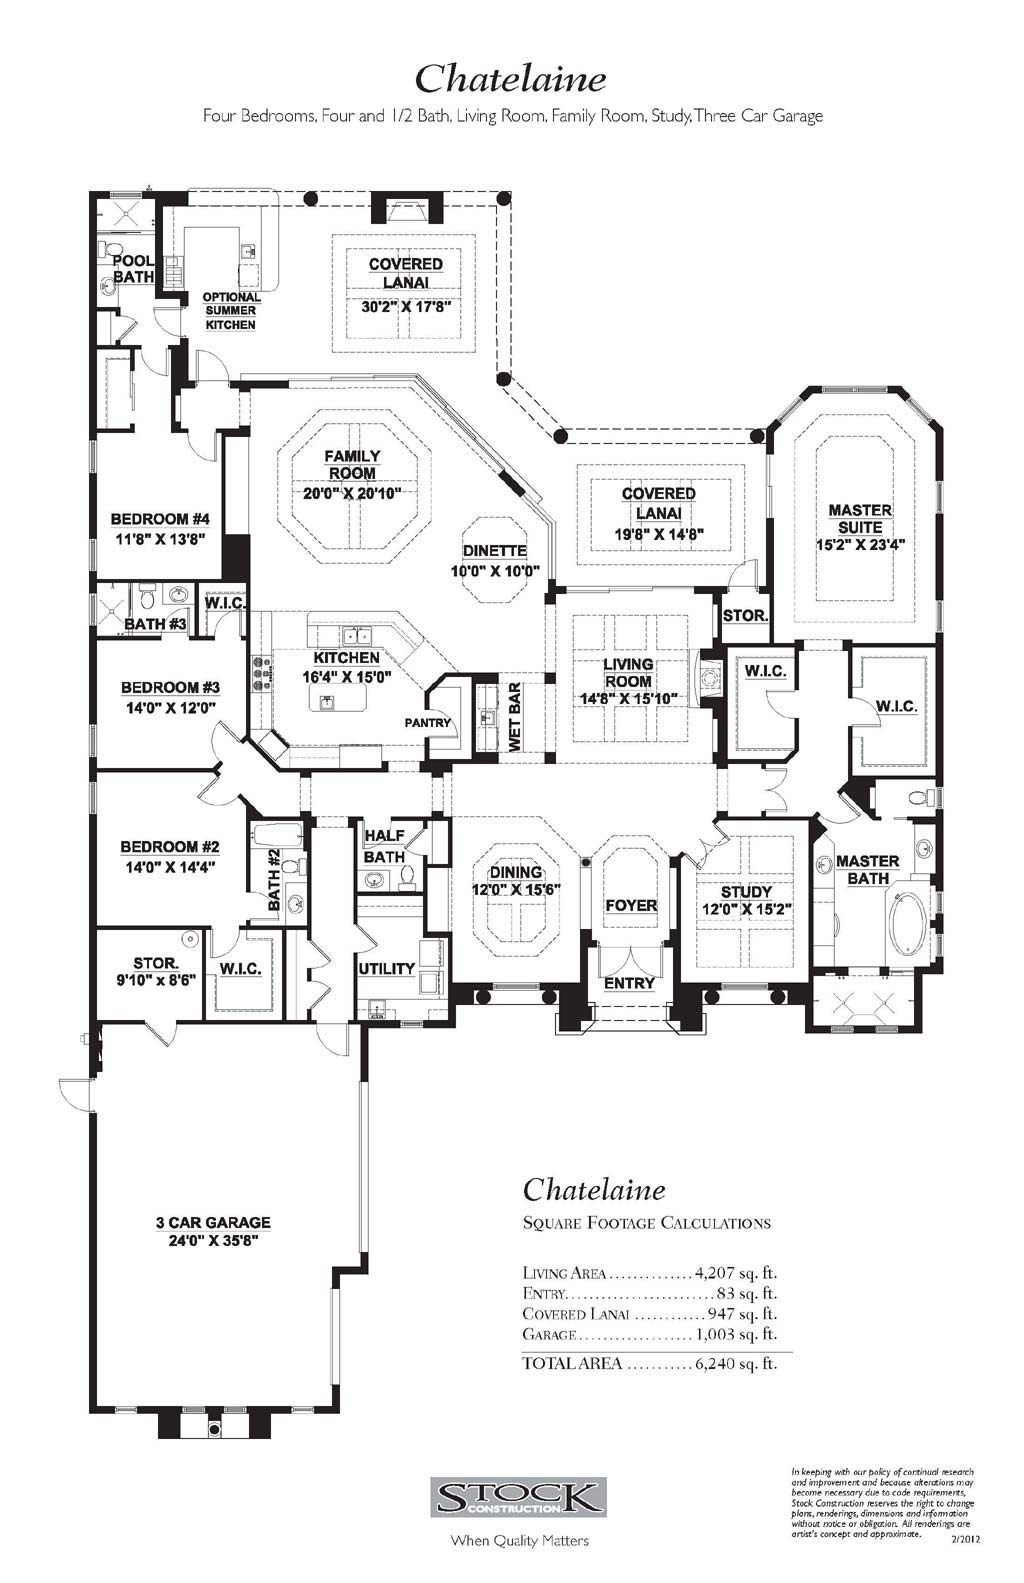 Chatelaine Floor Plan in Isla Del Sol at Fiddlers Creek, Naples, Stock Construction, 4 bedroom, 4 1/2 bath, living room, family room, study, dining room, dinette, 3-car garage with A/C storage area.